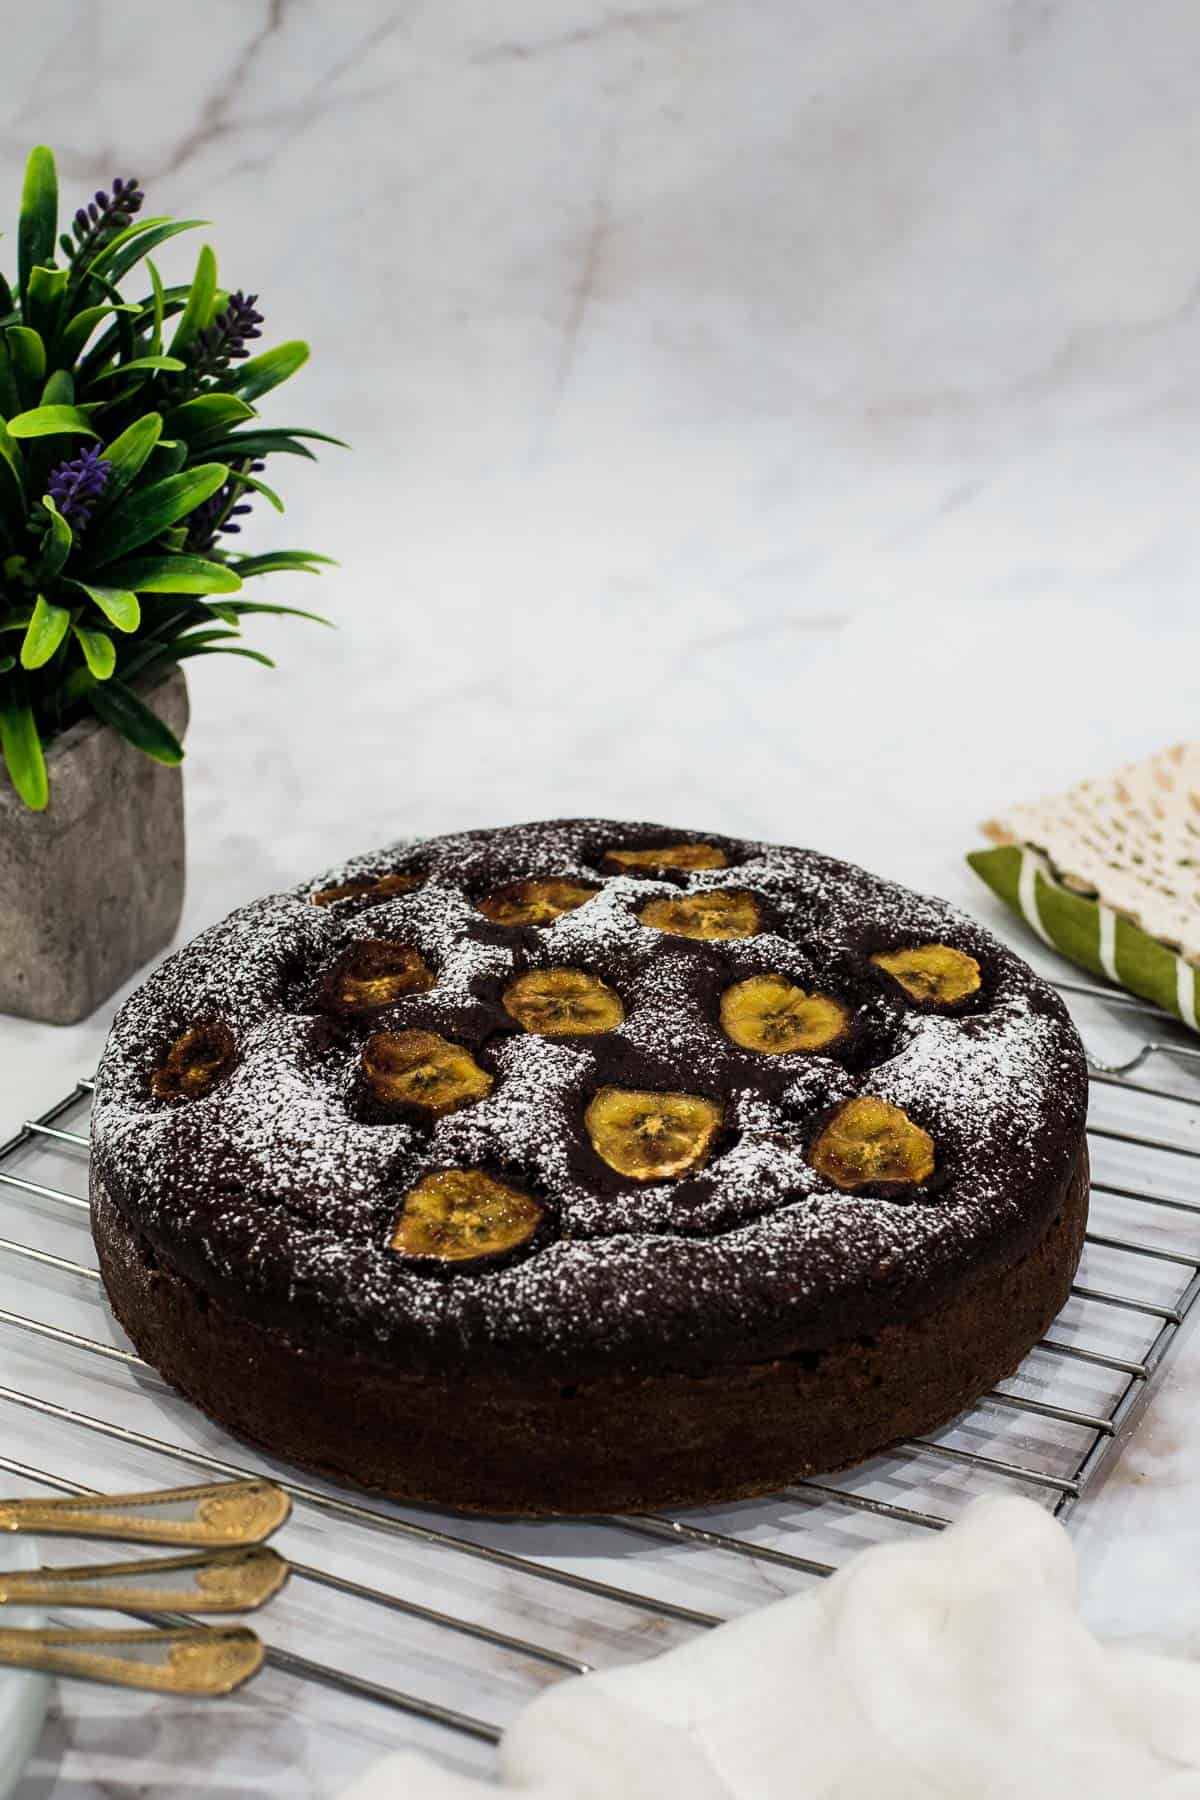 A round chocolate cake with caramelized banana slices on top, dredged with powdered sugar.